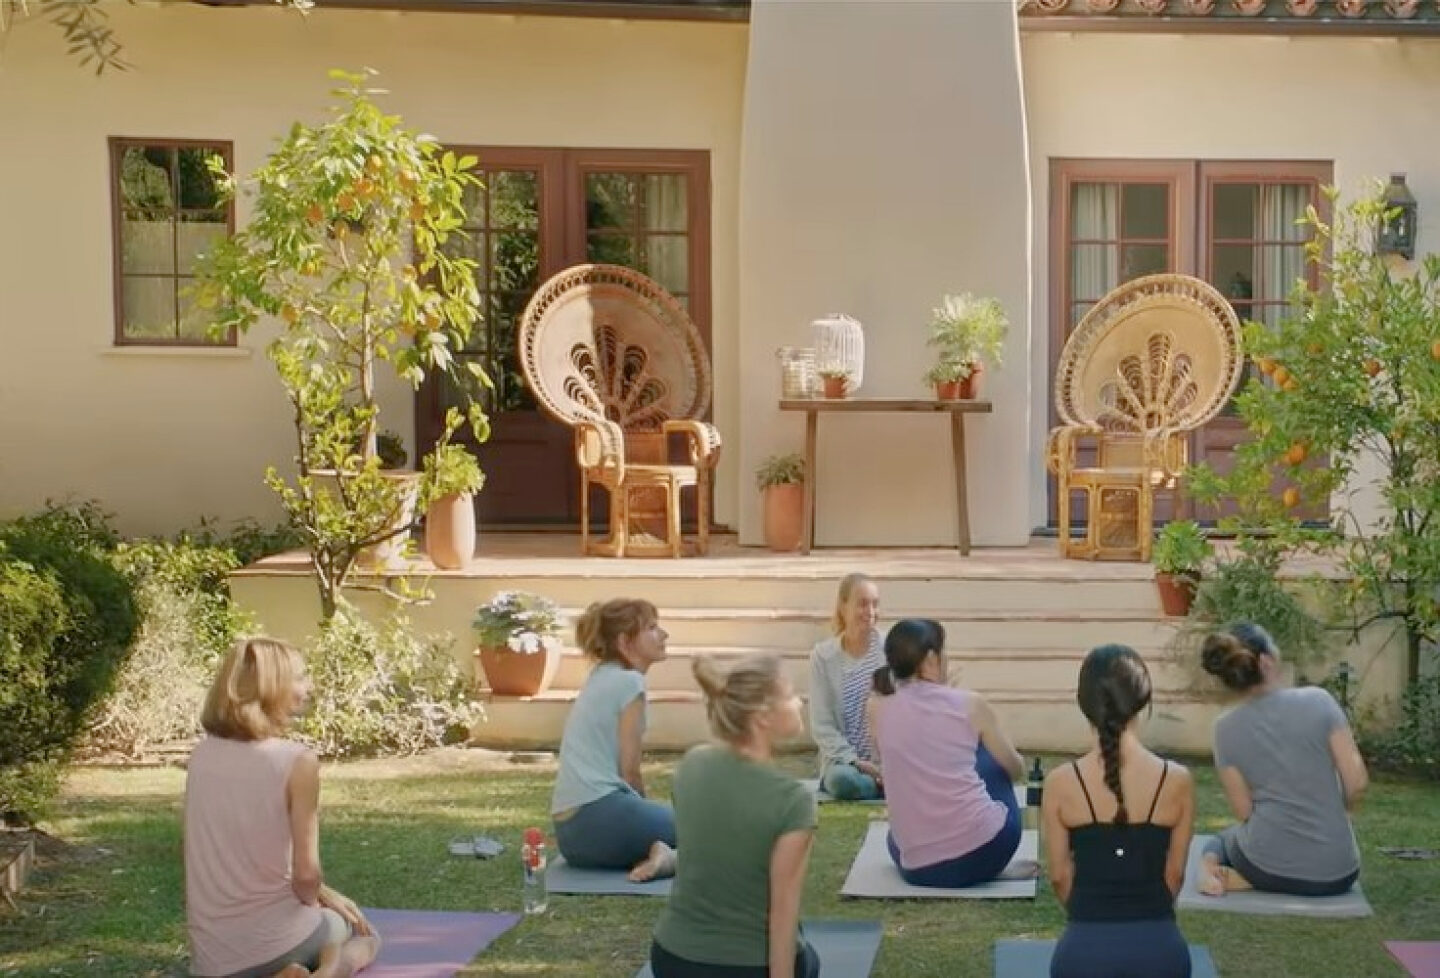 Reese Witherspoon Home Again movie house - a Spanish style cottage. #homeagainmovie